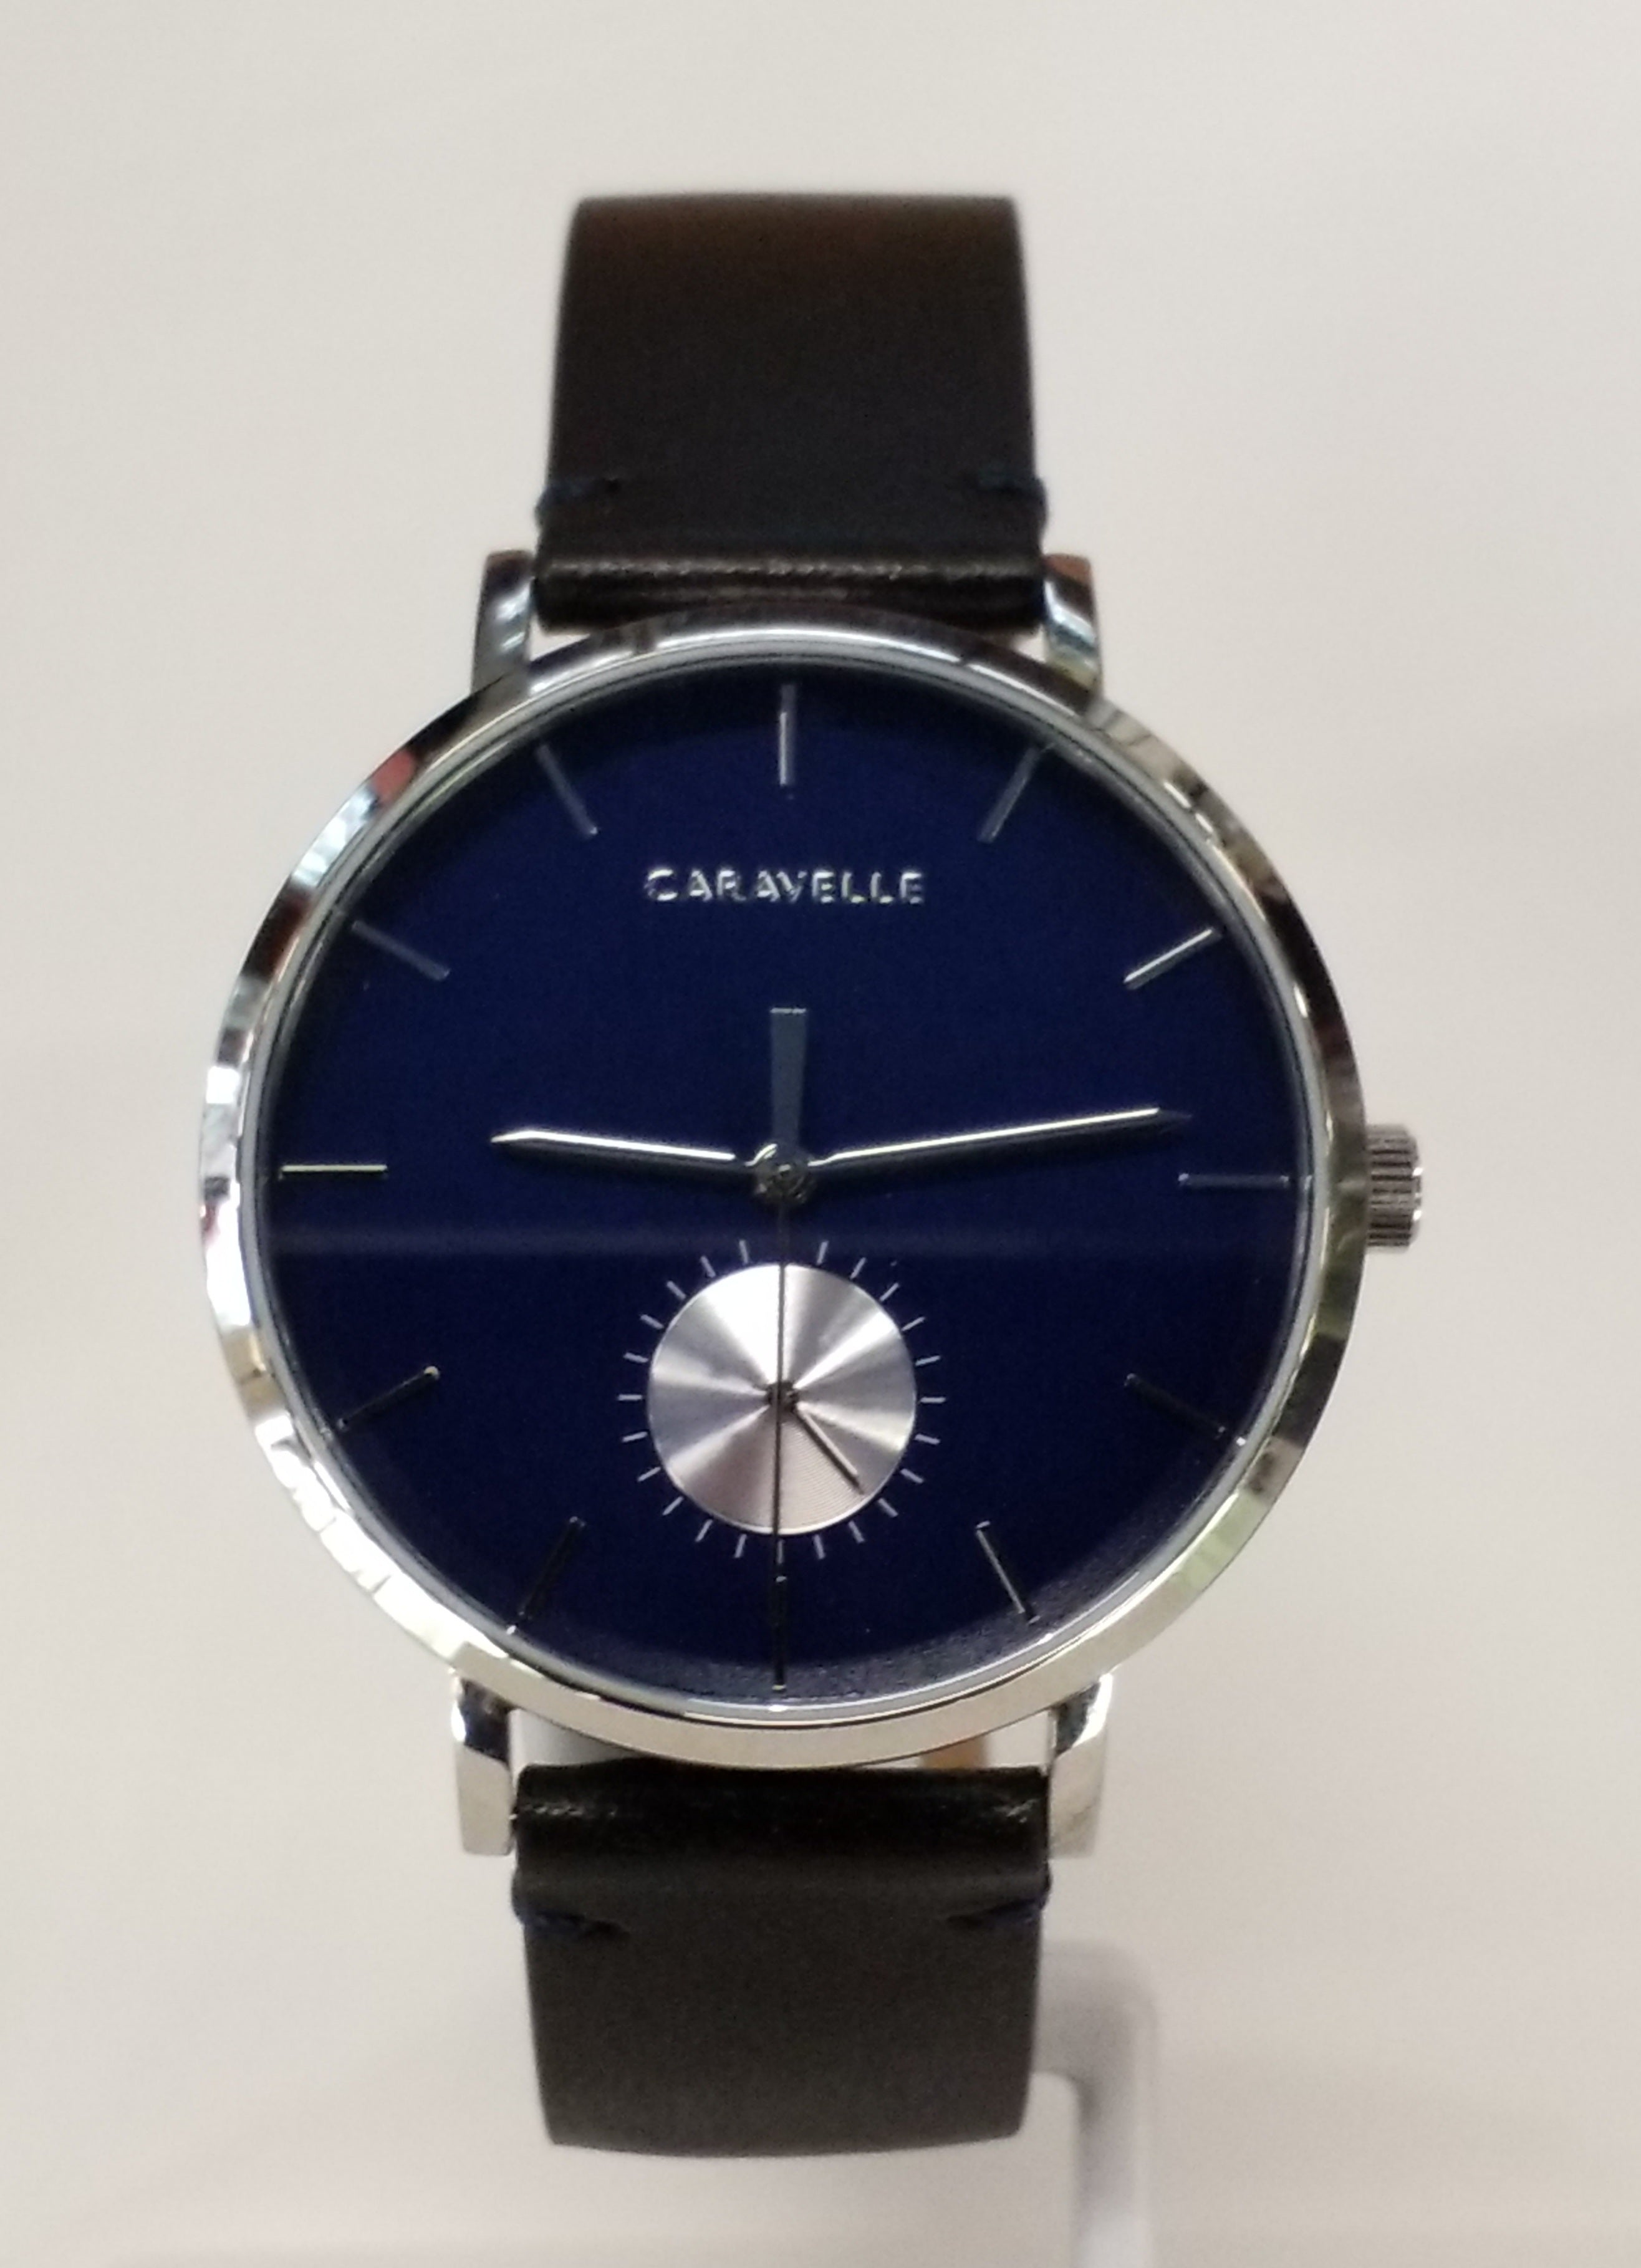 Caravelle Black Leather Watch